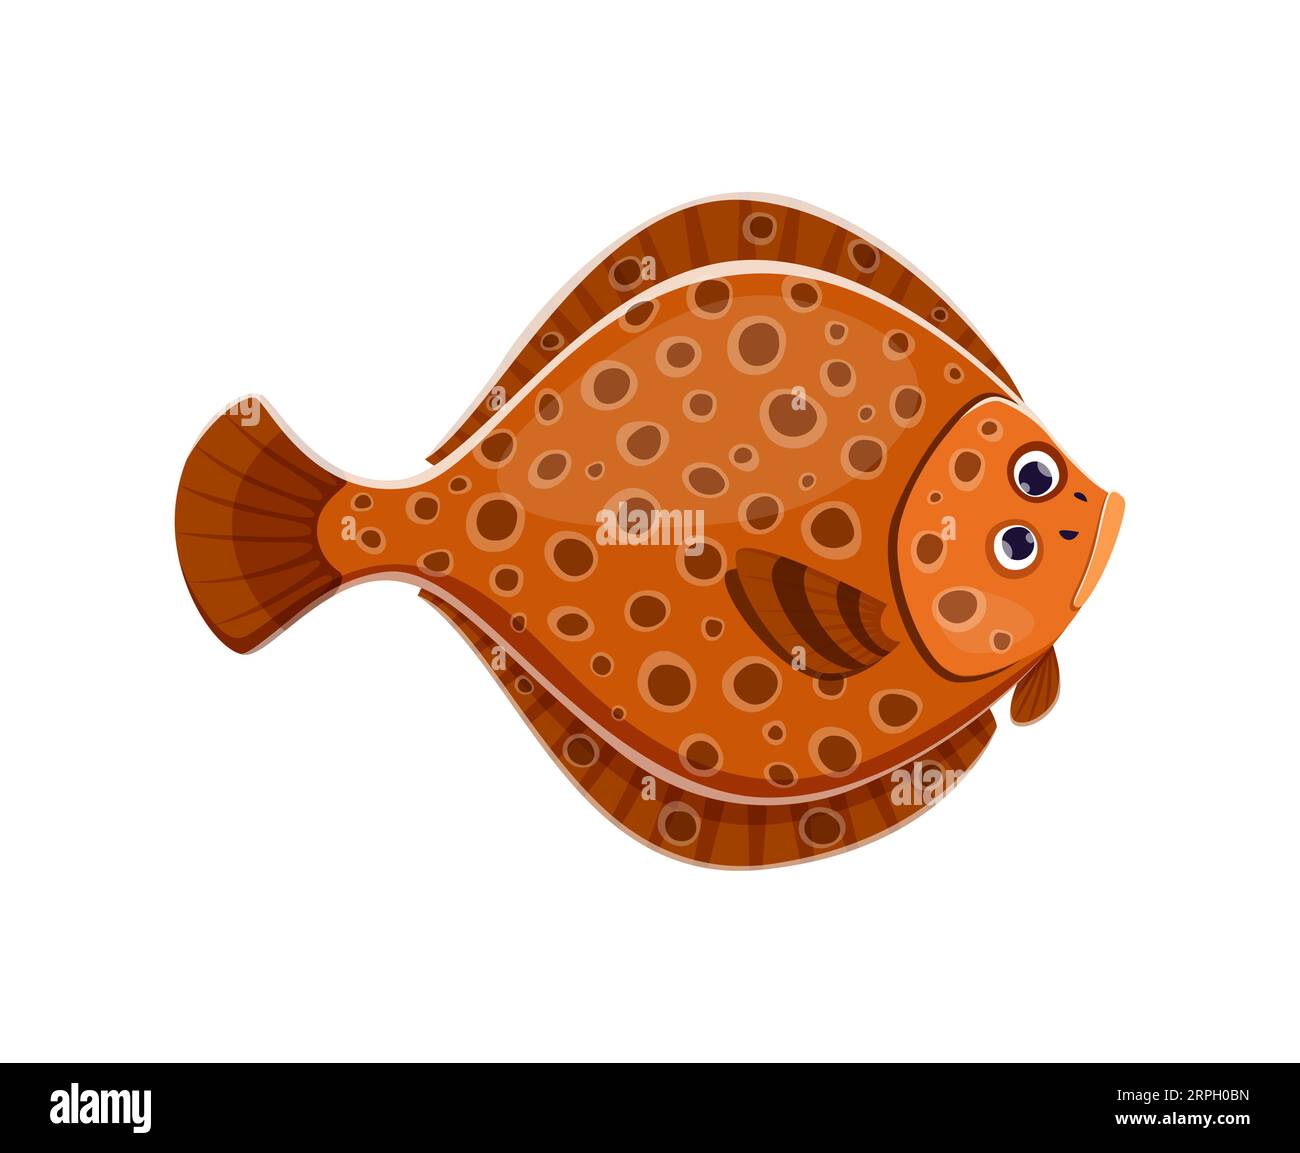 Cartoon flounder fish character. Isolated vector flat-bodied plaice marine creature with both eyes on one side of head. Master of camouflage, blending seamlessly with their surroundings to ambush prey Stock Vector